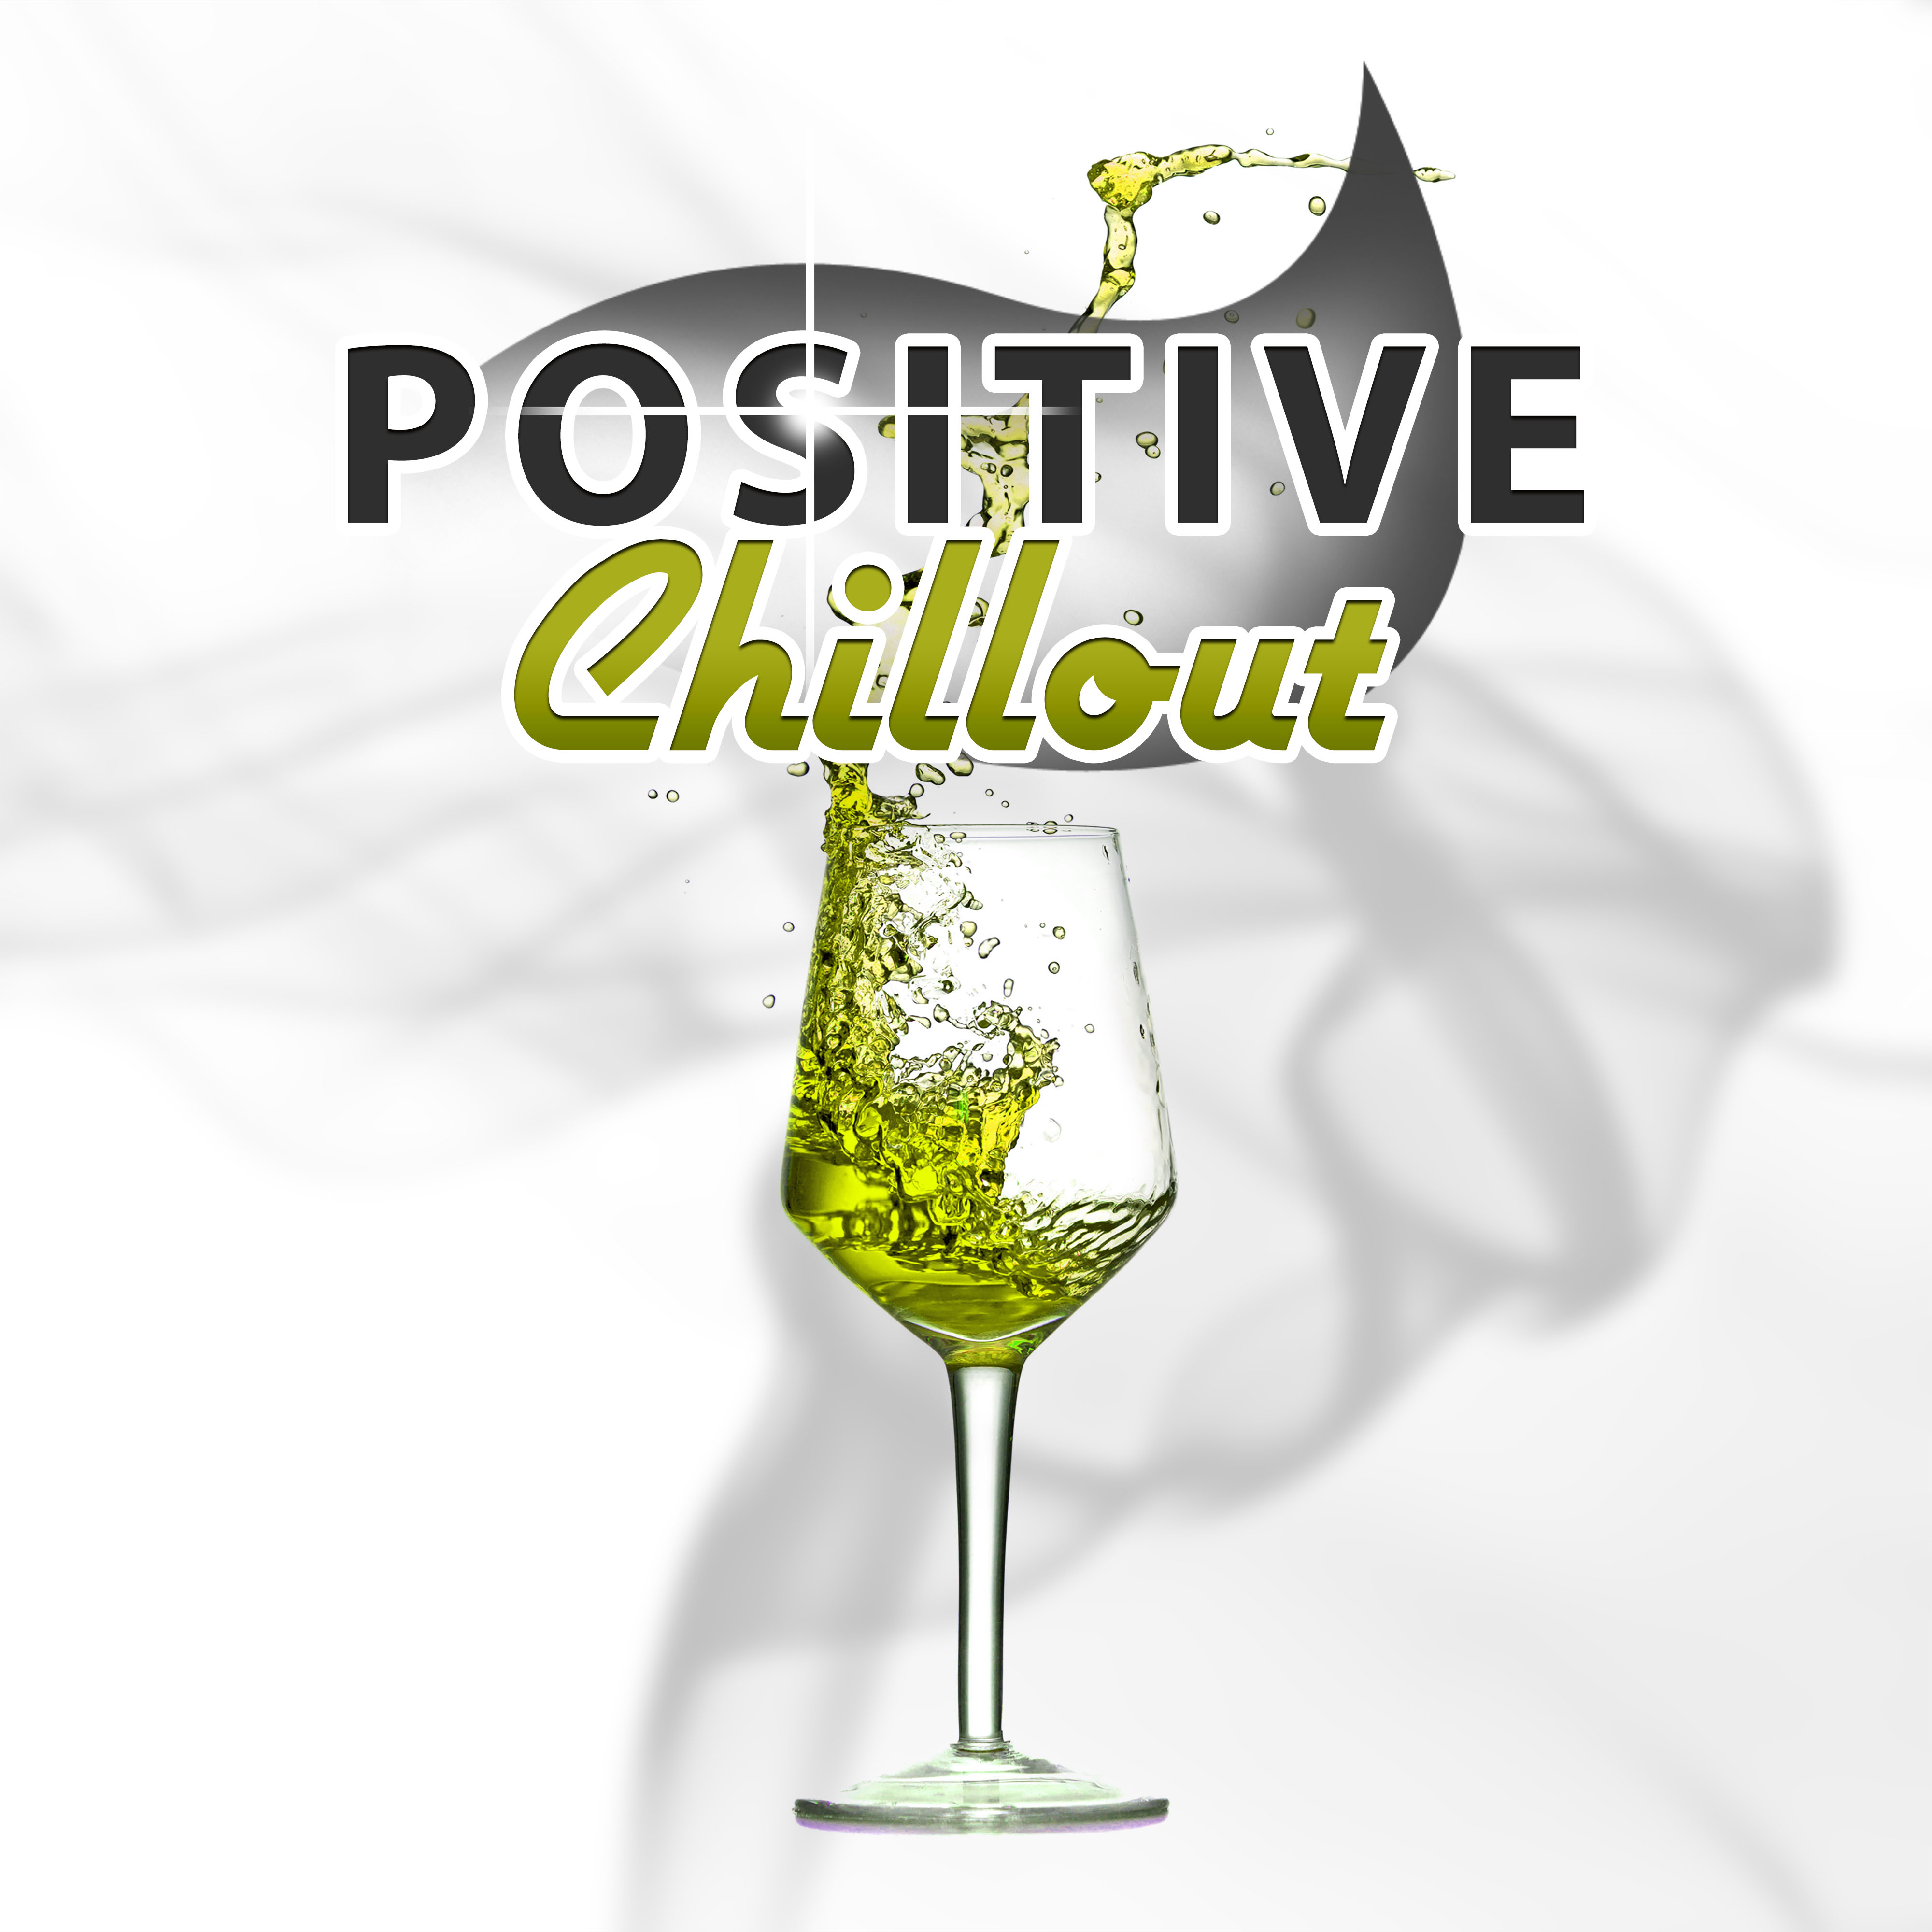 Positive Chillout – Deep Vibes, Positive Energy, Ambient Music, Summer Breeze